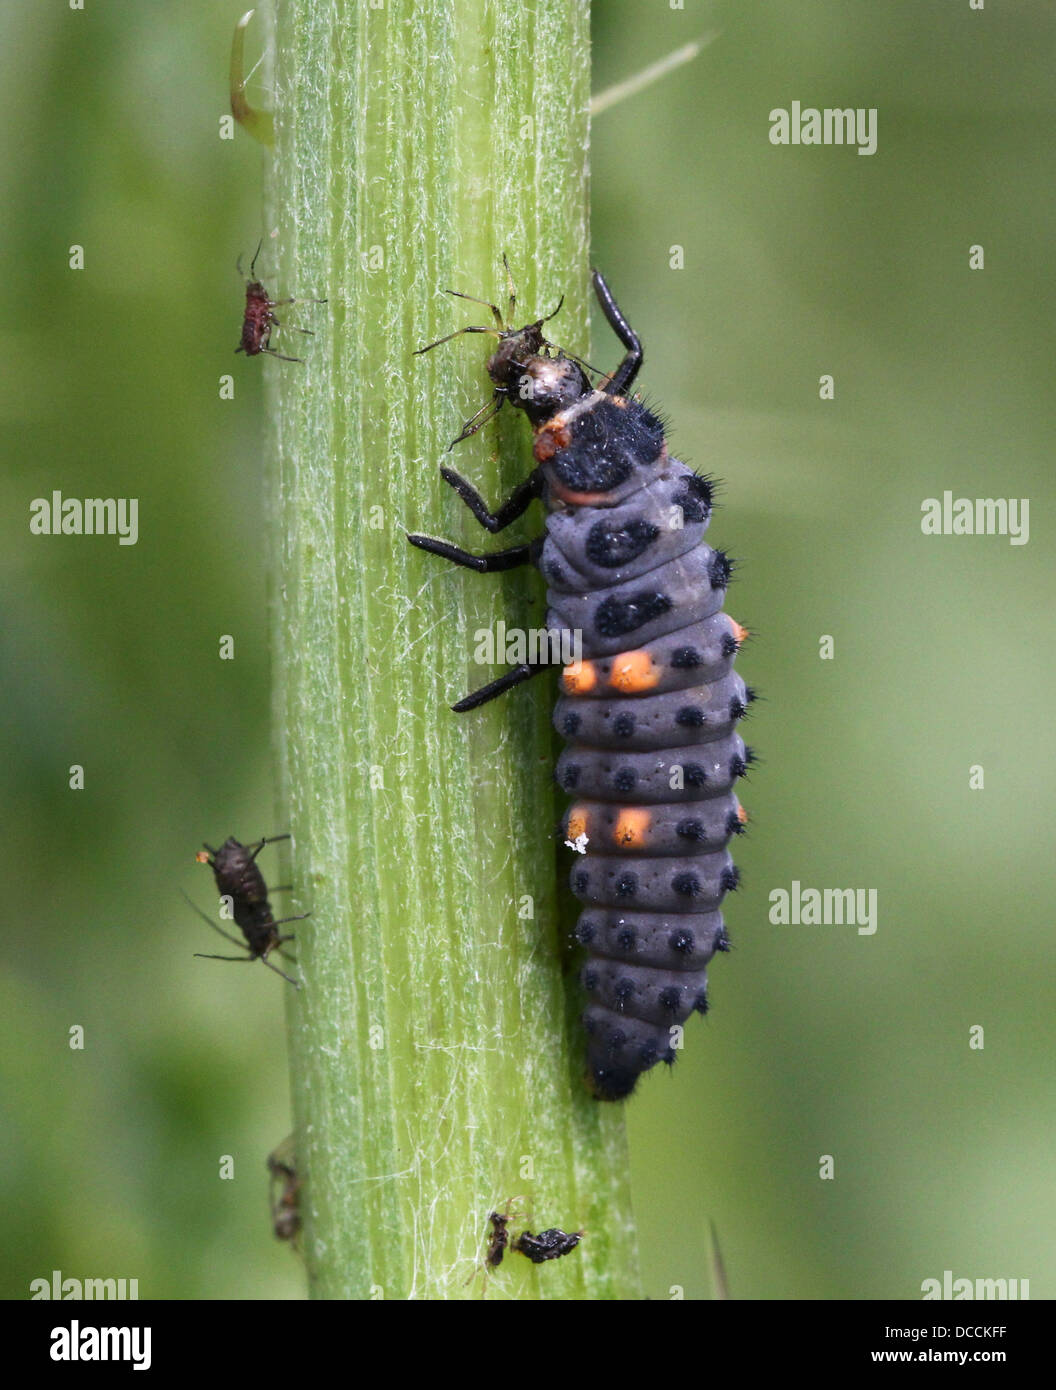 Larva of the Seven-spot ladybird or spotted ladybug (Coccinella septempunctata) close-up Stock Photo